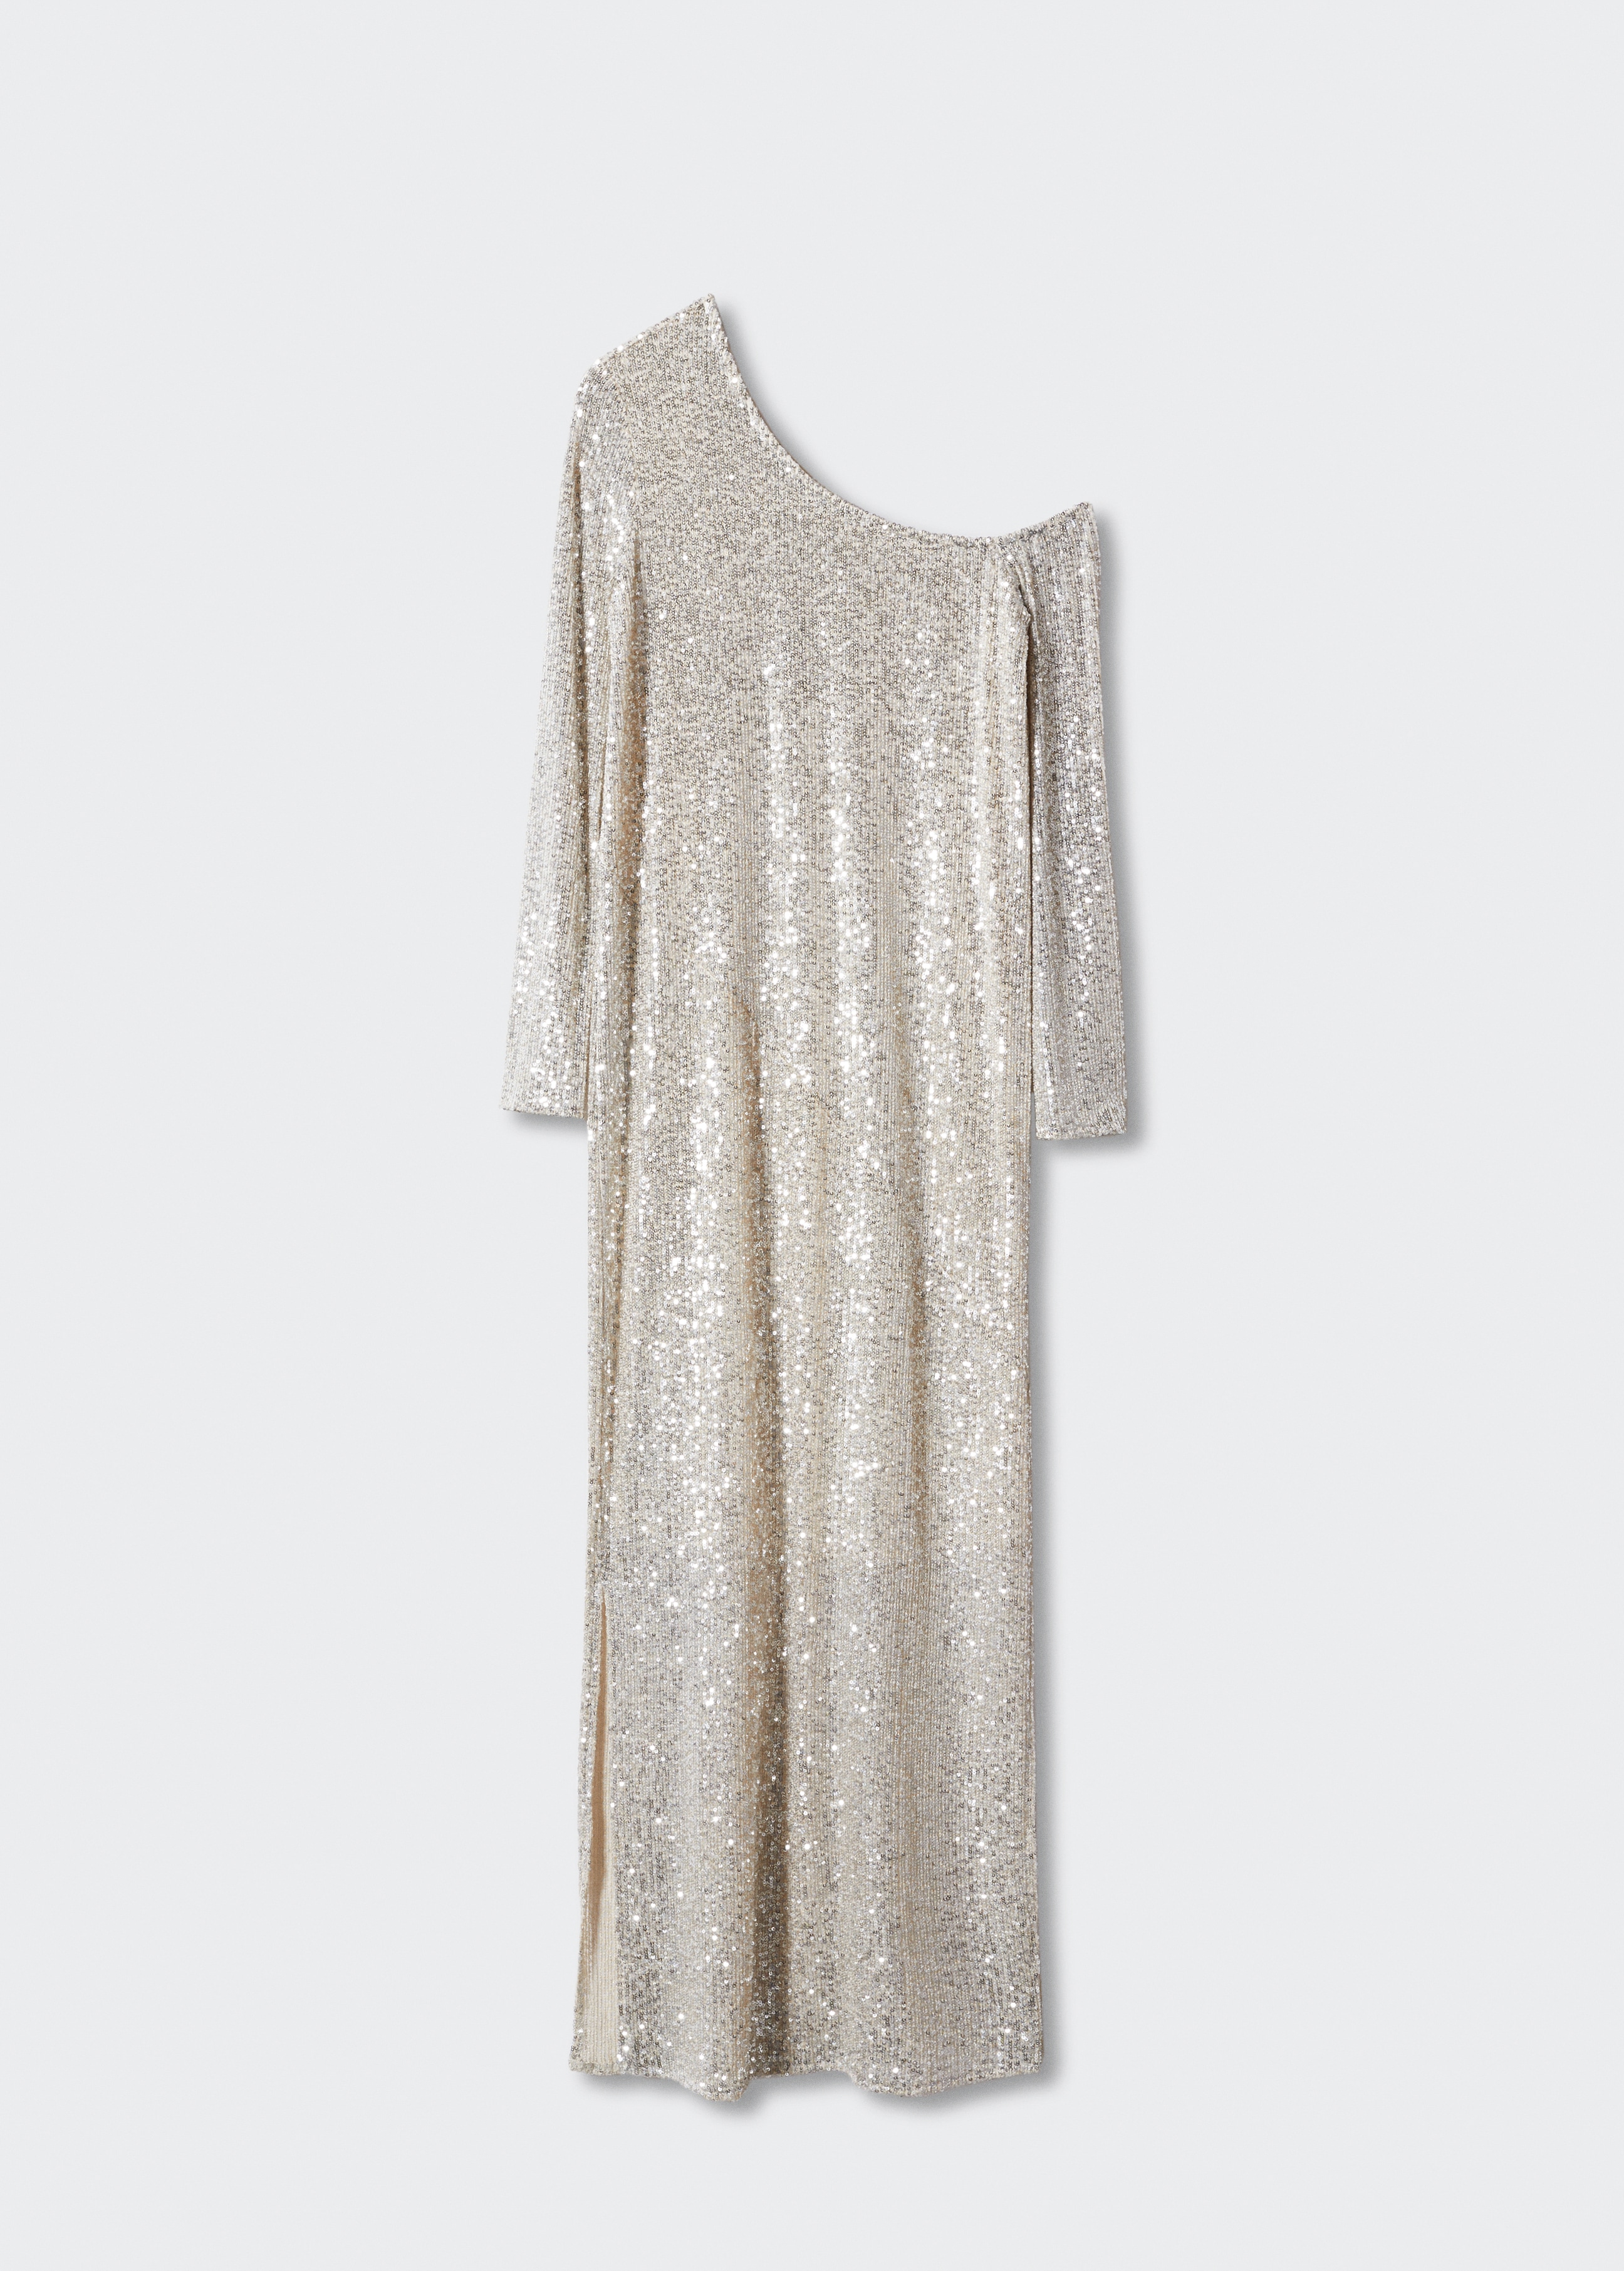 Asymmetric sequin dress - Article without model